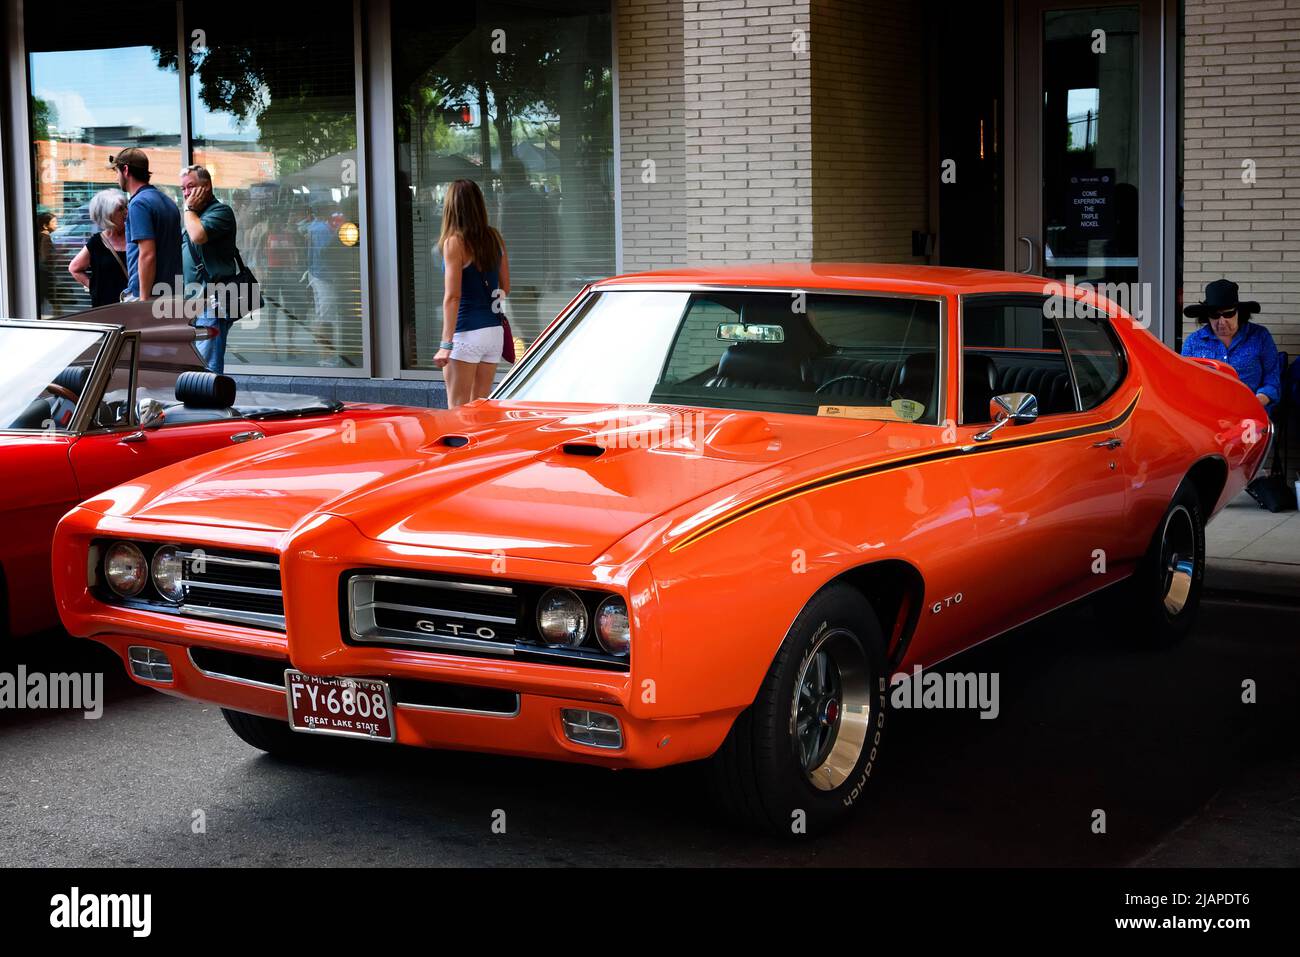 A 1969 Pontiac GTO photographed at the 2015 Woodward Dream Cruise,  The Woodward Dream Cruise event is an automotive enthusiast event held annually on the third Saturday of August in Metropolitan Detroit, Michigan, along Woodward Avenue, a major thoroughfare built in the early 20th century. USA Stock Photo